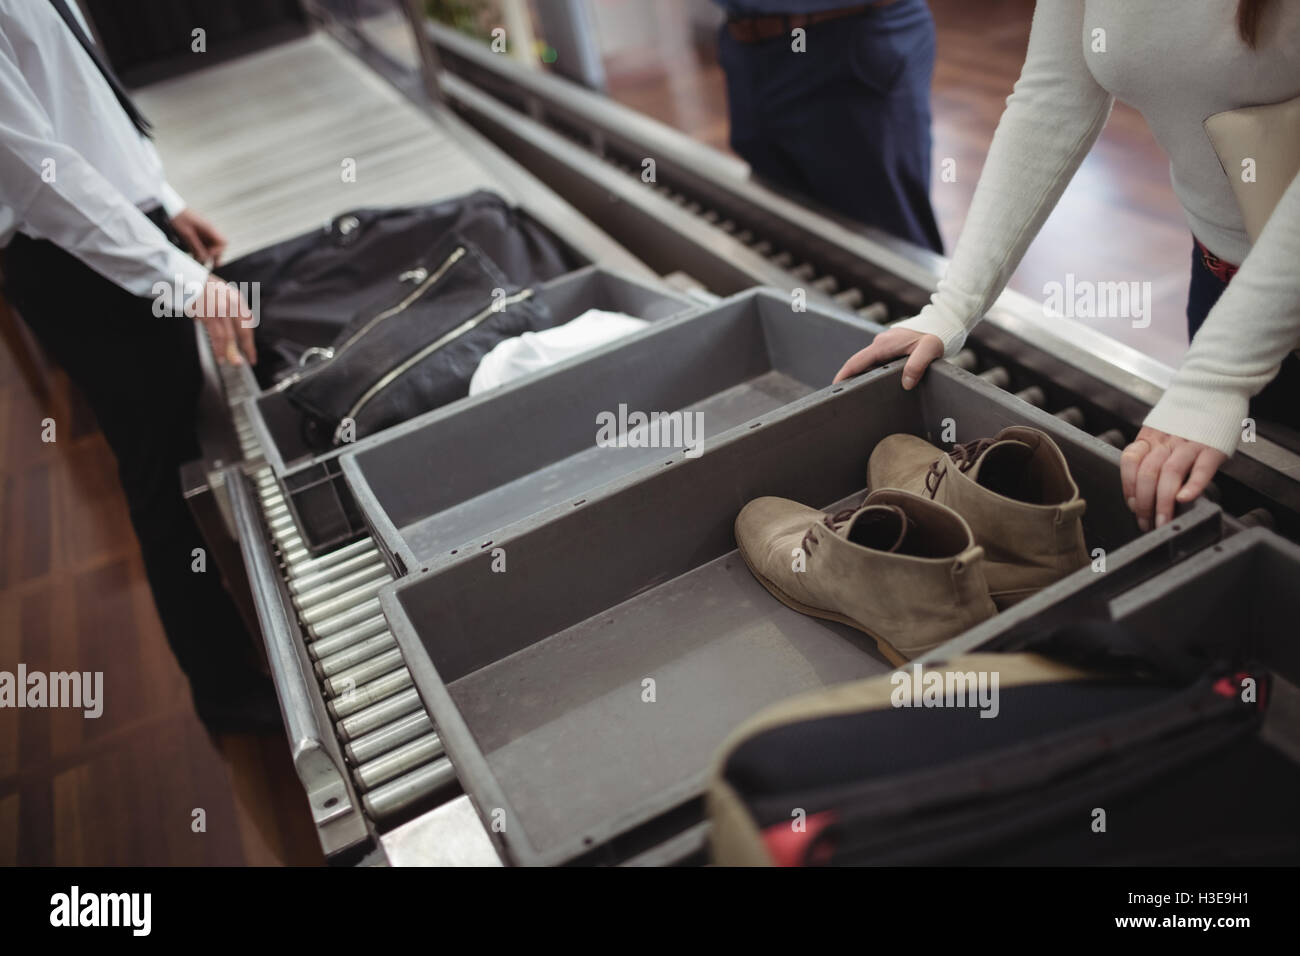 Woman putting shoes into tray for security check Stock Photo